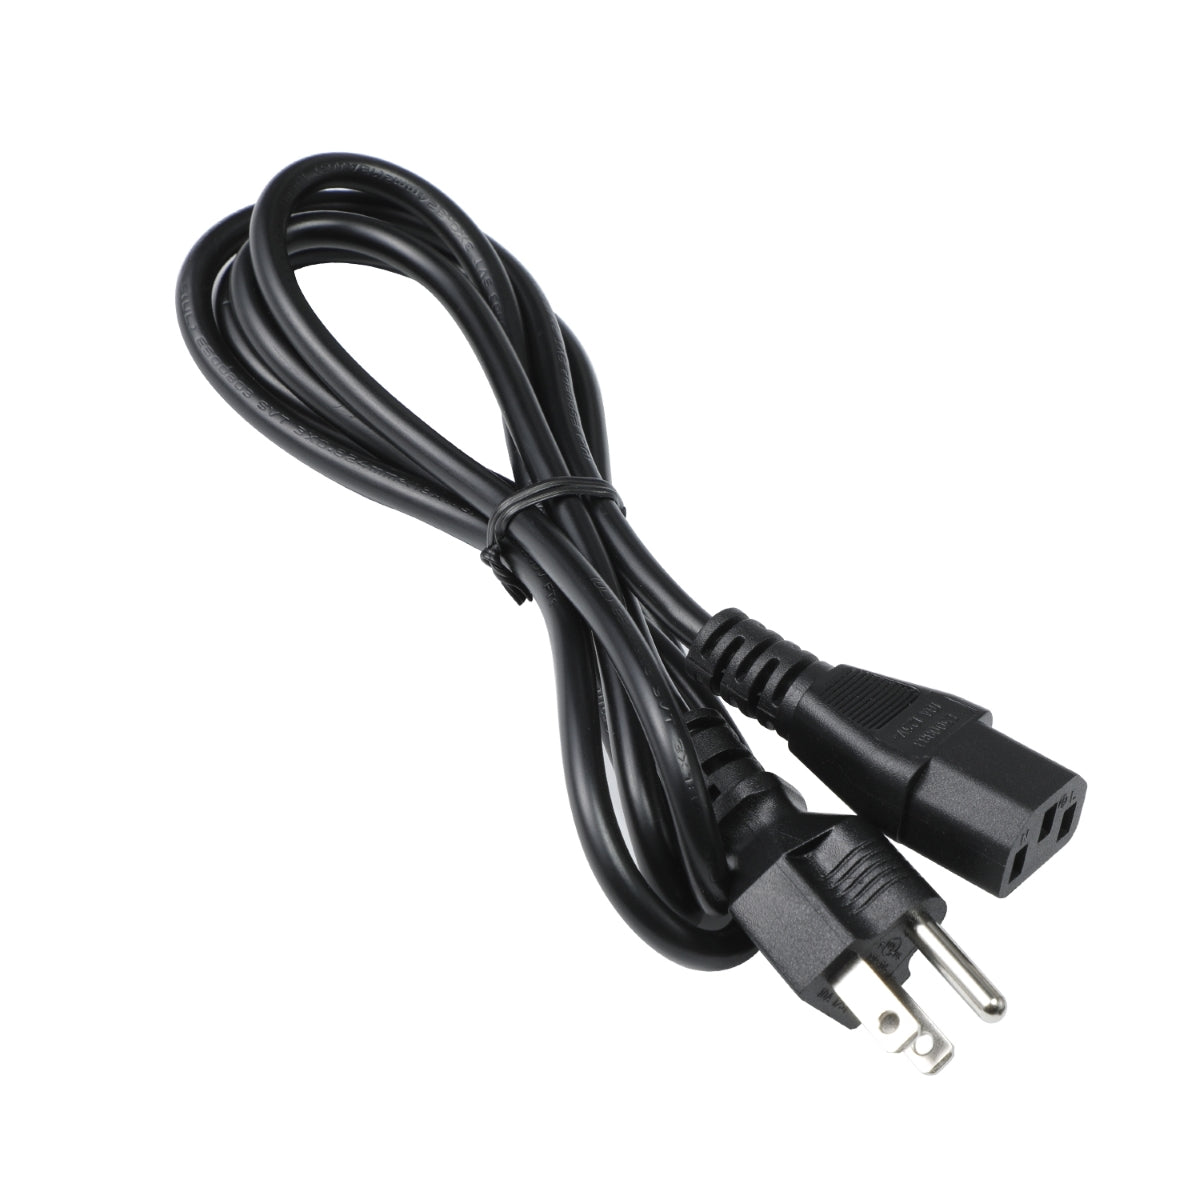 Power Cord for Acer BE270U Bmjjpprzx Monitor